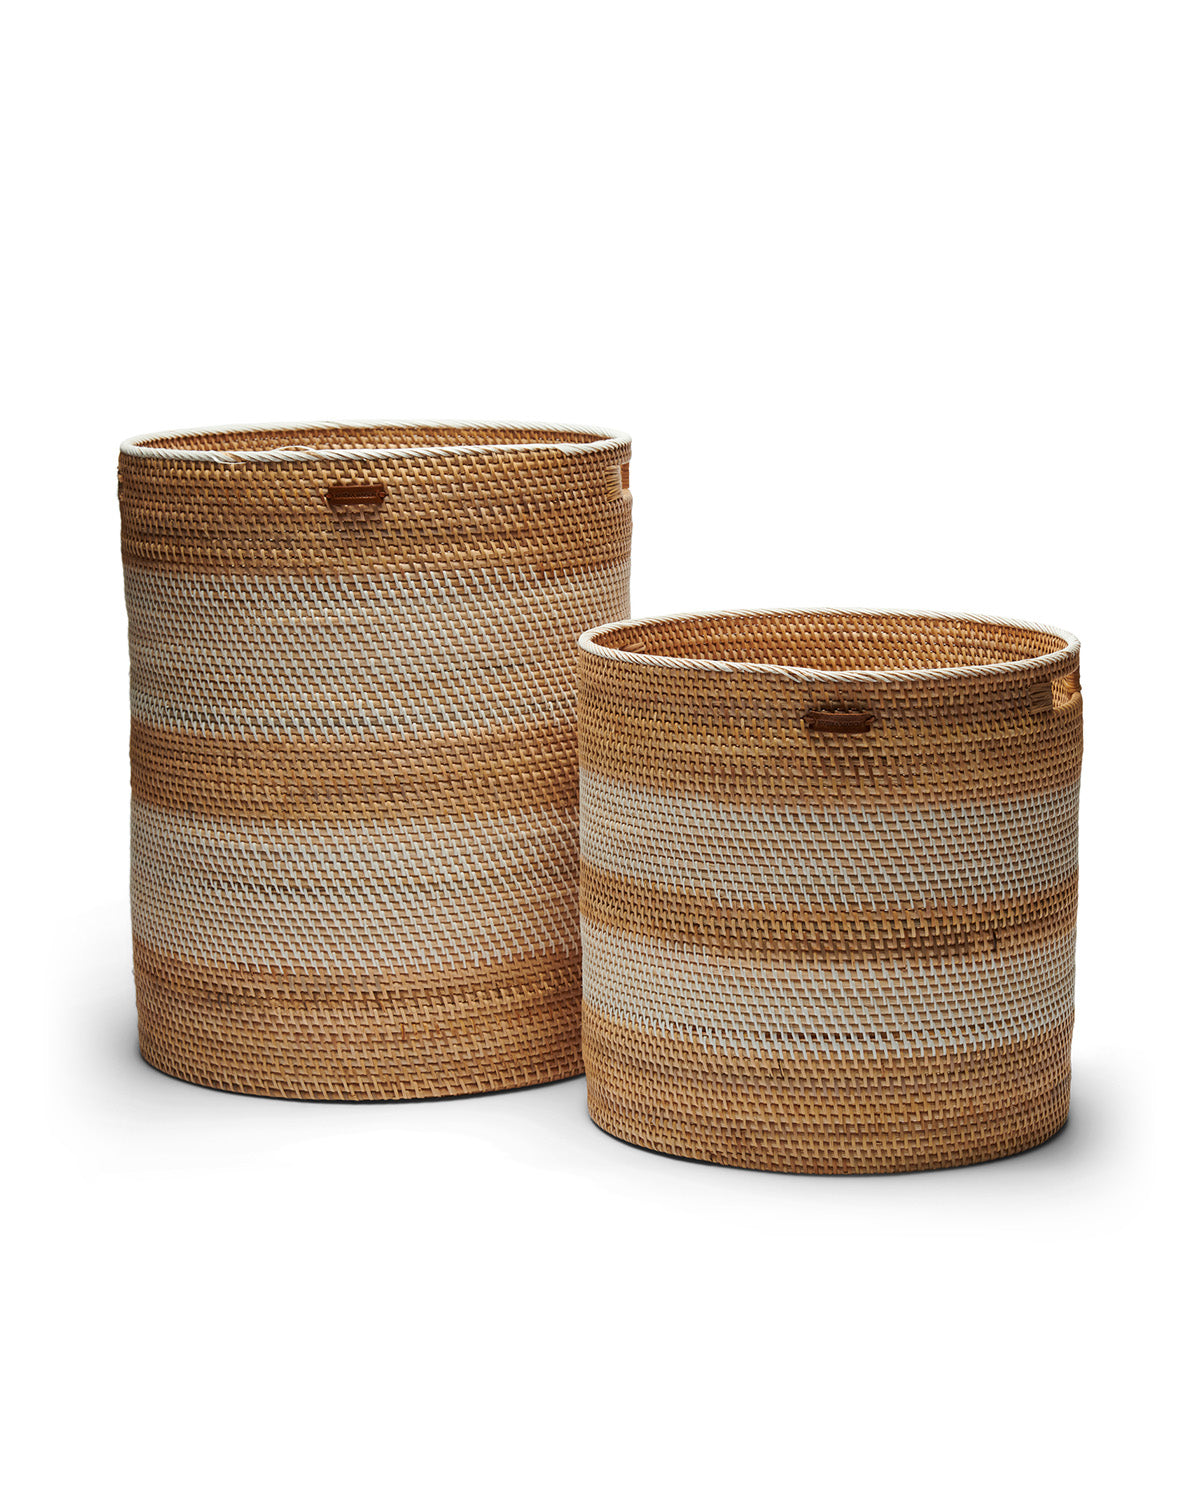 Two large Baskets made from rattan, hand-woven in a white and natural stripe pattern by Riviera Maison